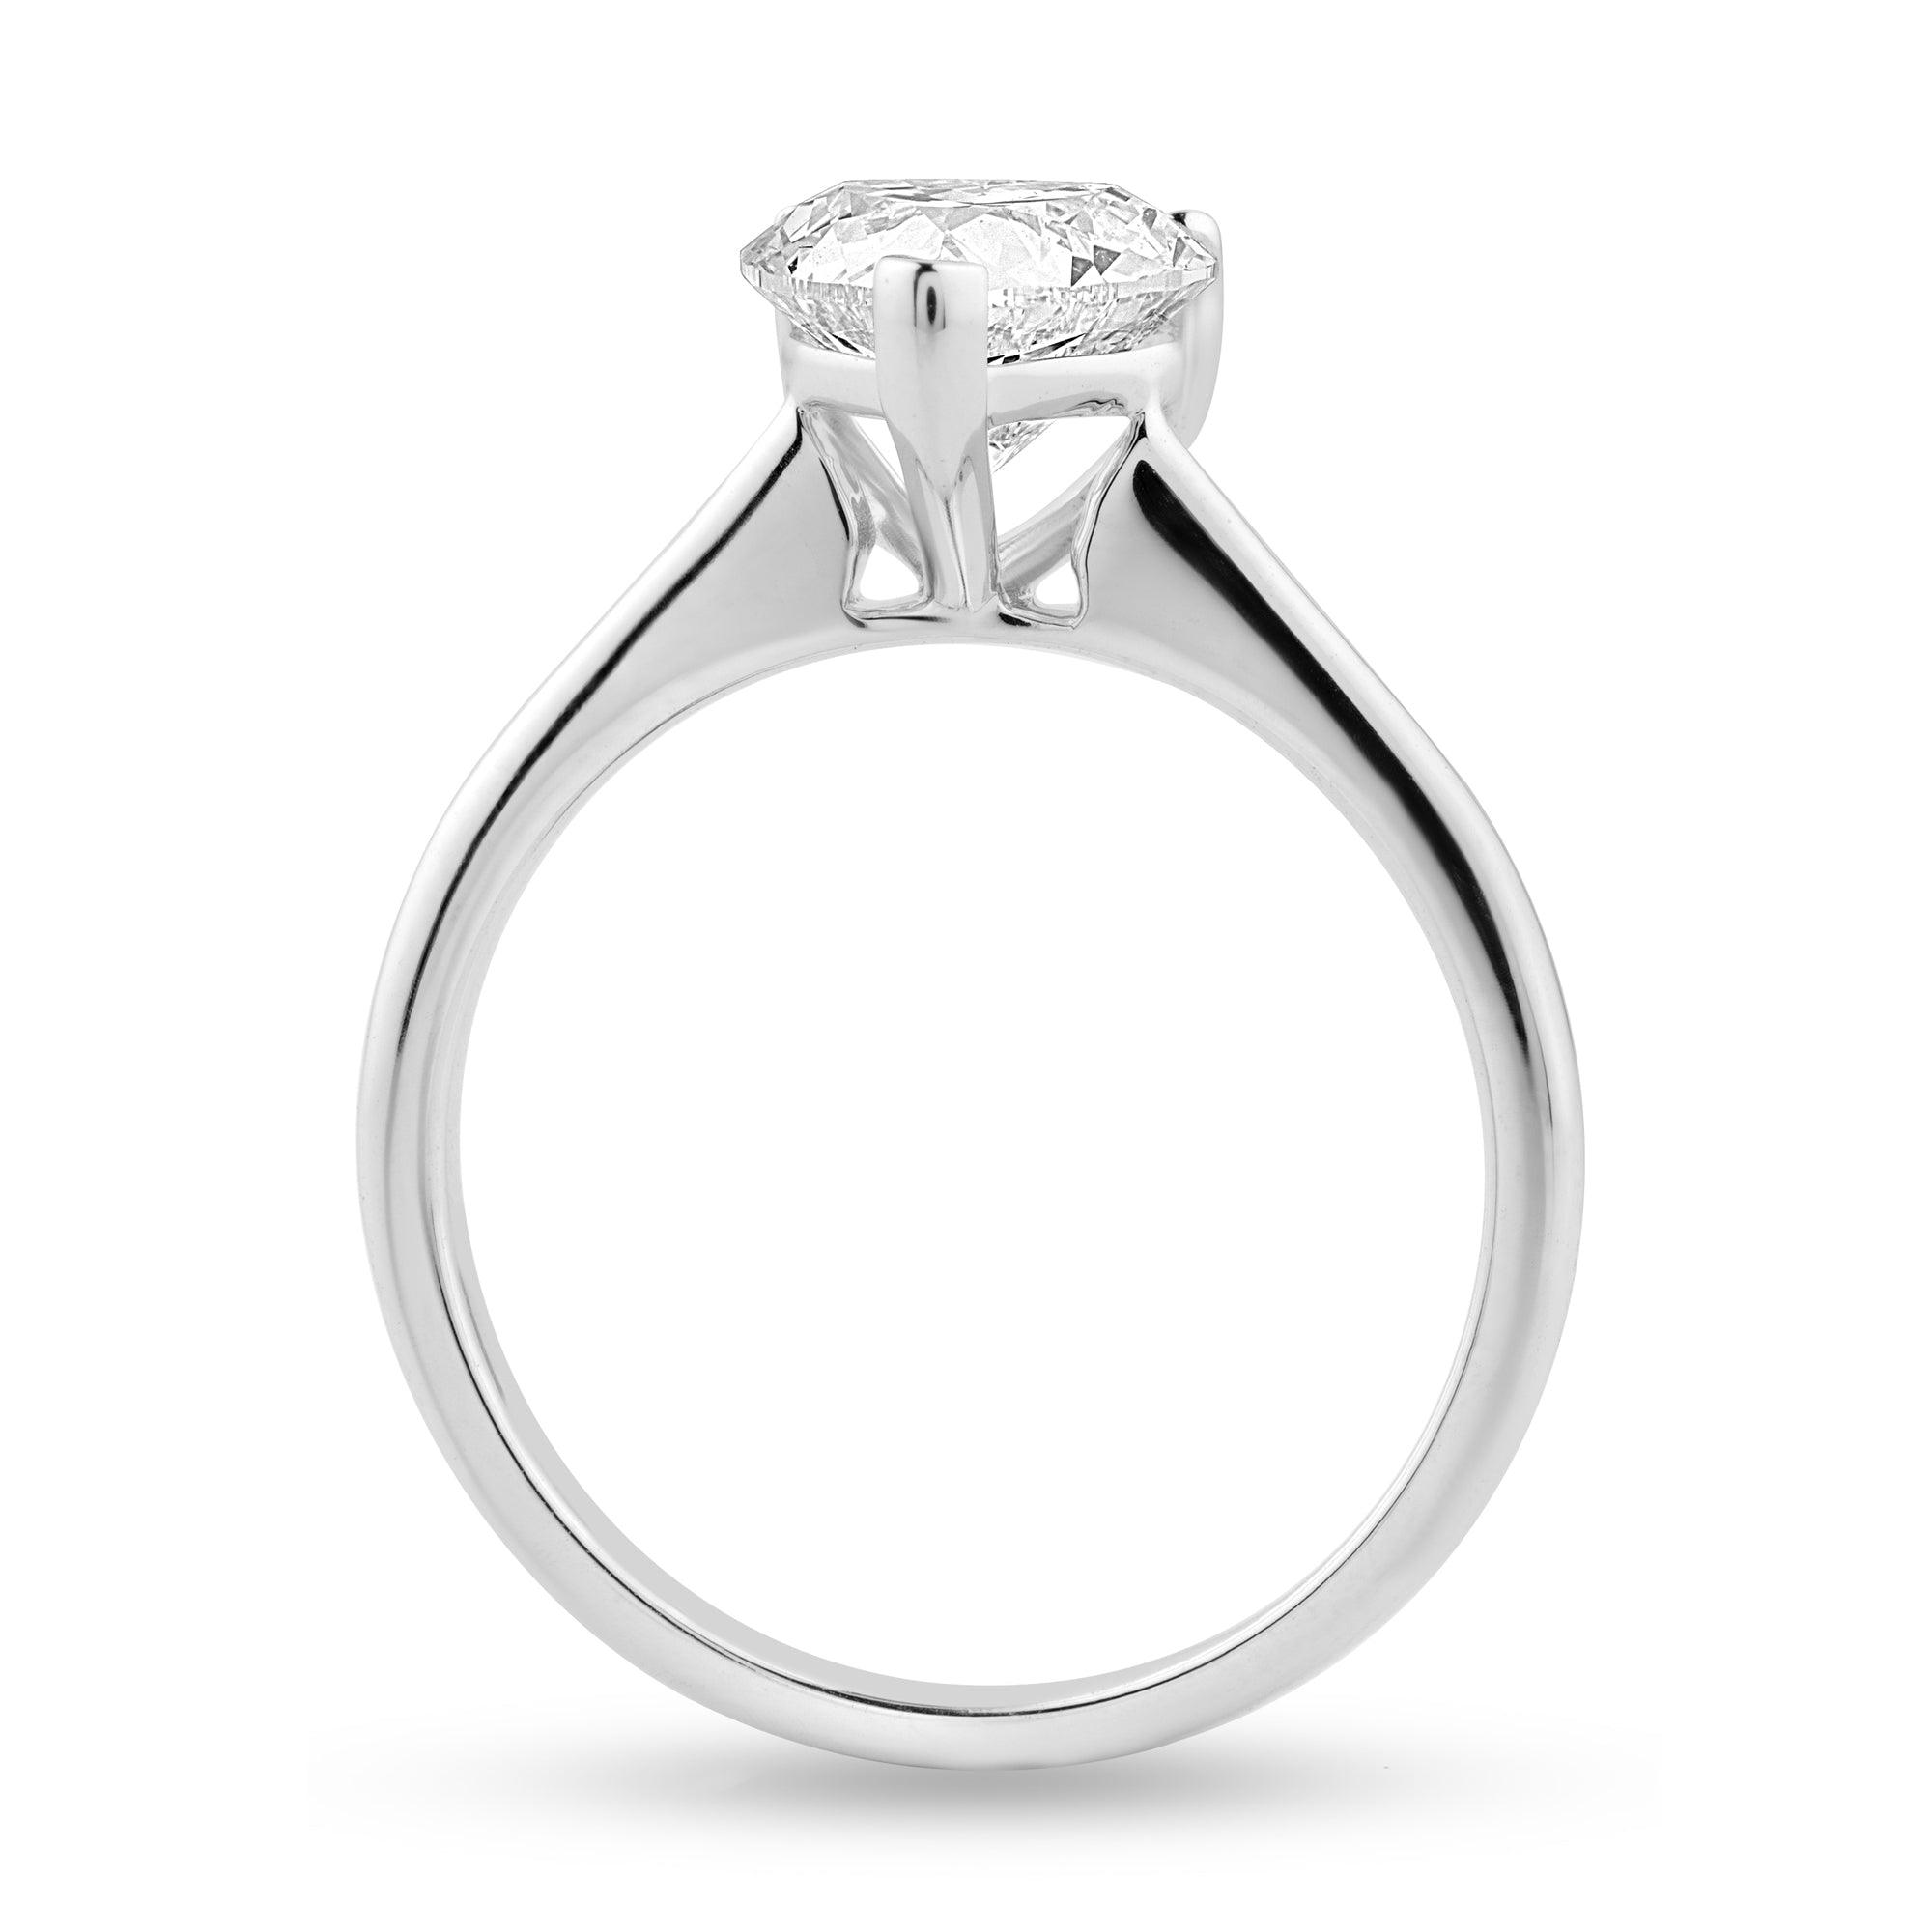 Moissanite Solitaire Ring with 1.7ct Heart Center Stone - Harmony Bound